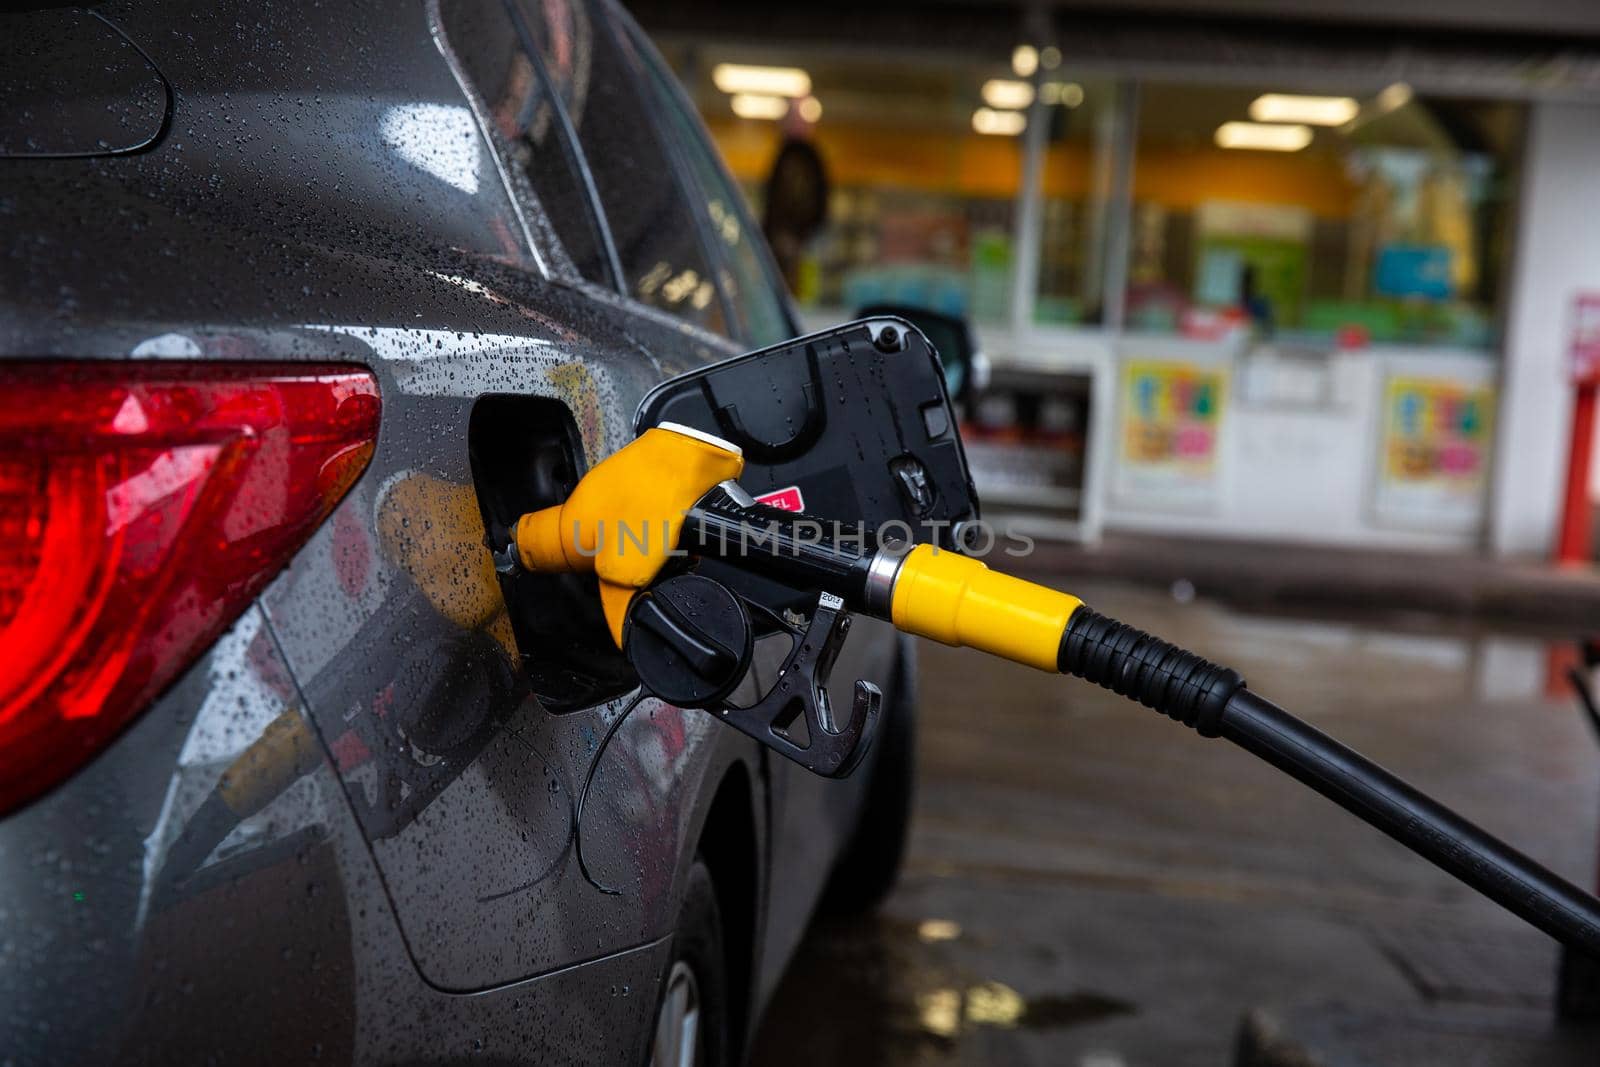 Refueling refilling car vehicle with fuel at refuel fuel gas pump station - Petrol diesel gas pump gun in the tank to fill